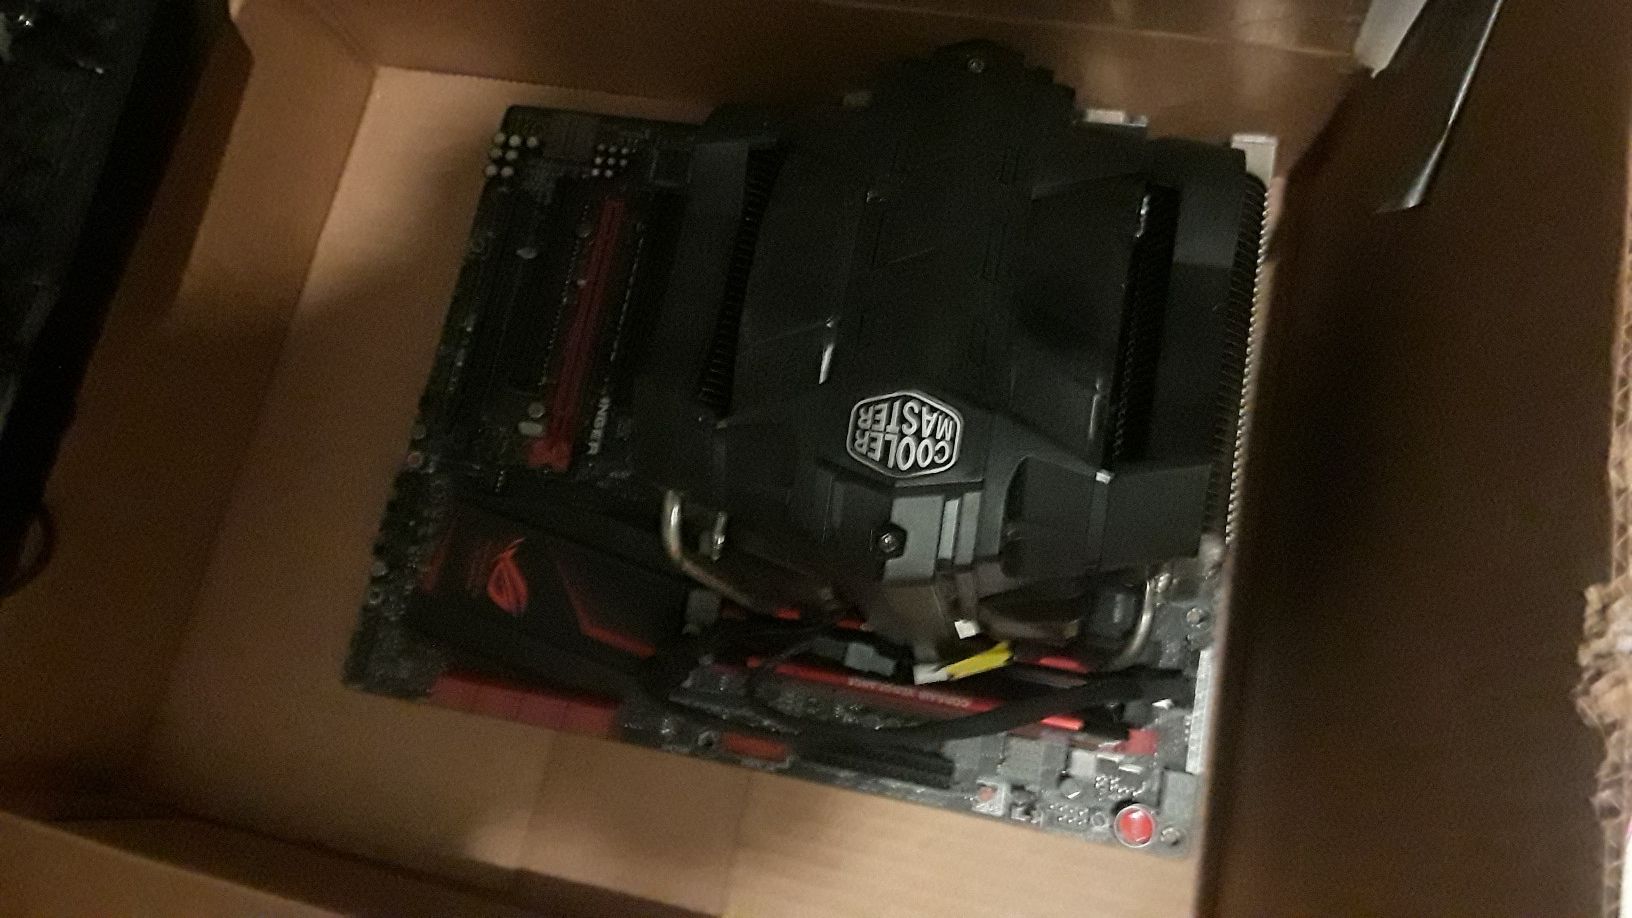 Cool master v8 GTS w/ crossblade ranger mother board and a keyboard. Gaming computer parts